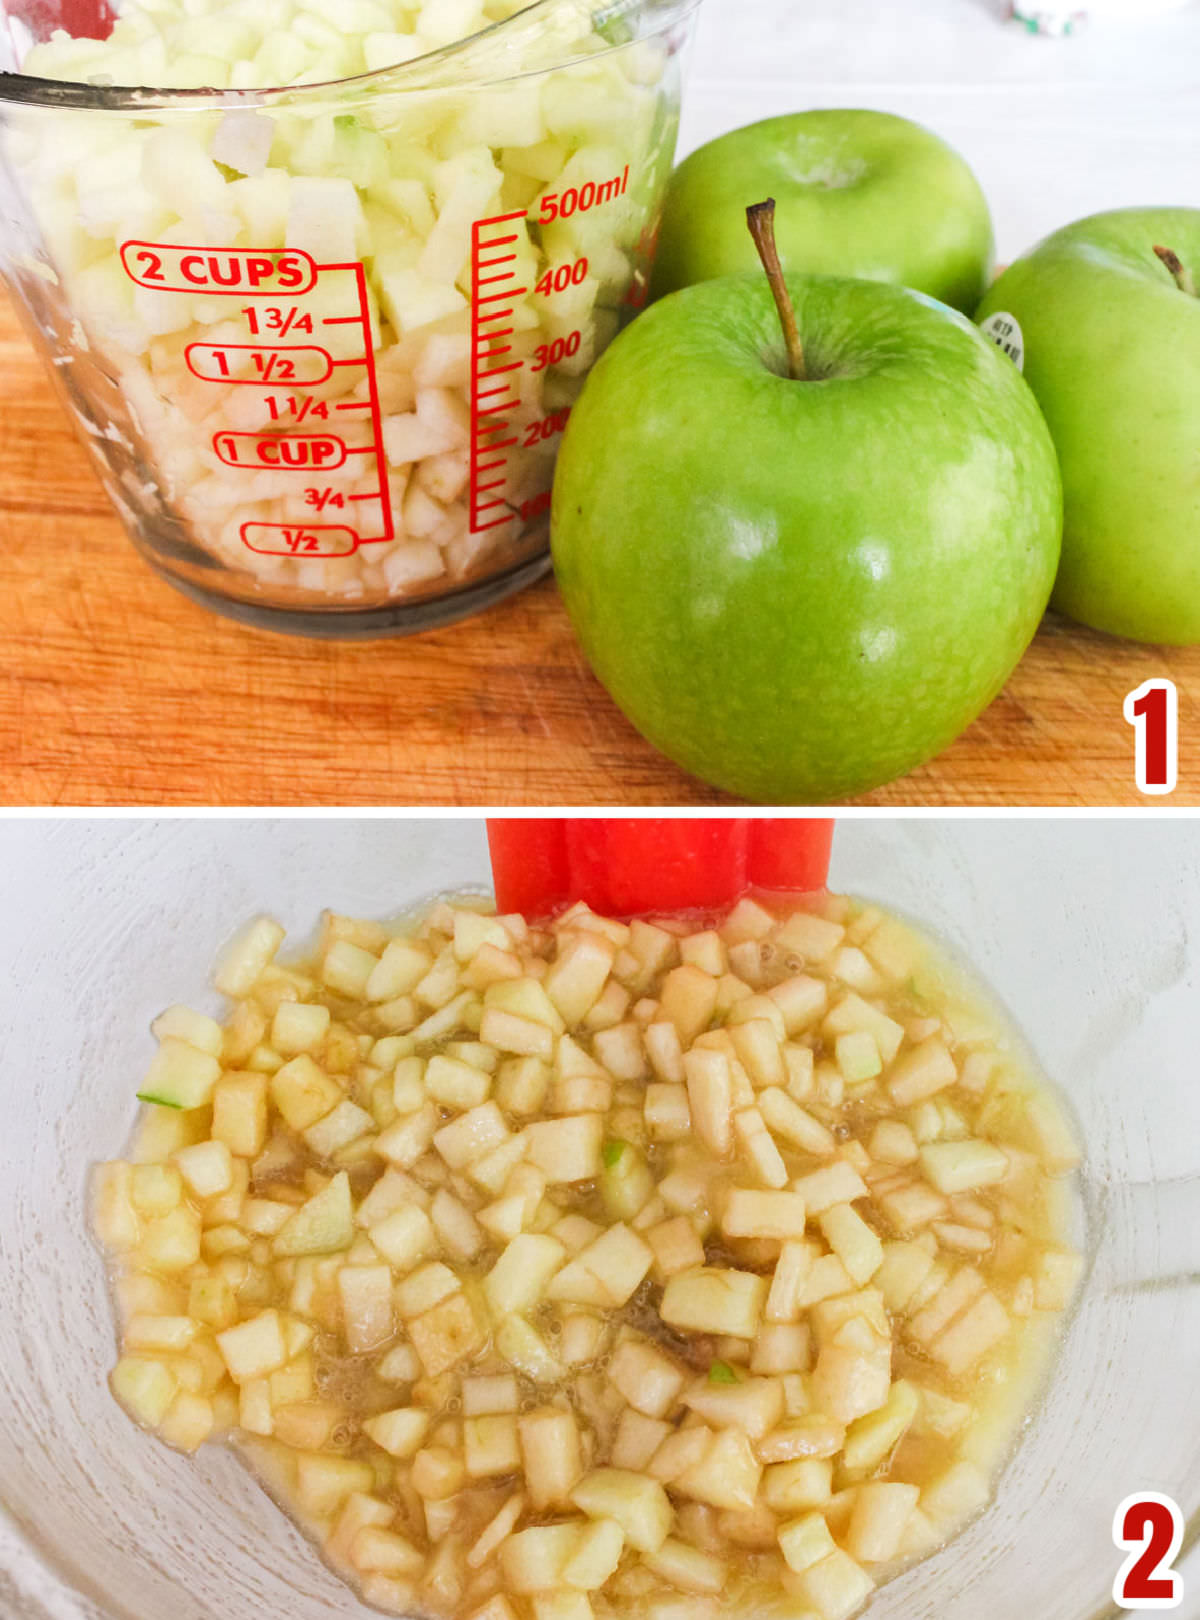 Collage image showing the steps for dicing the apples and mixing the wet ingredients for the Apple Bread batter.